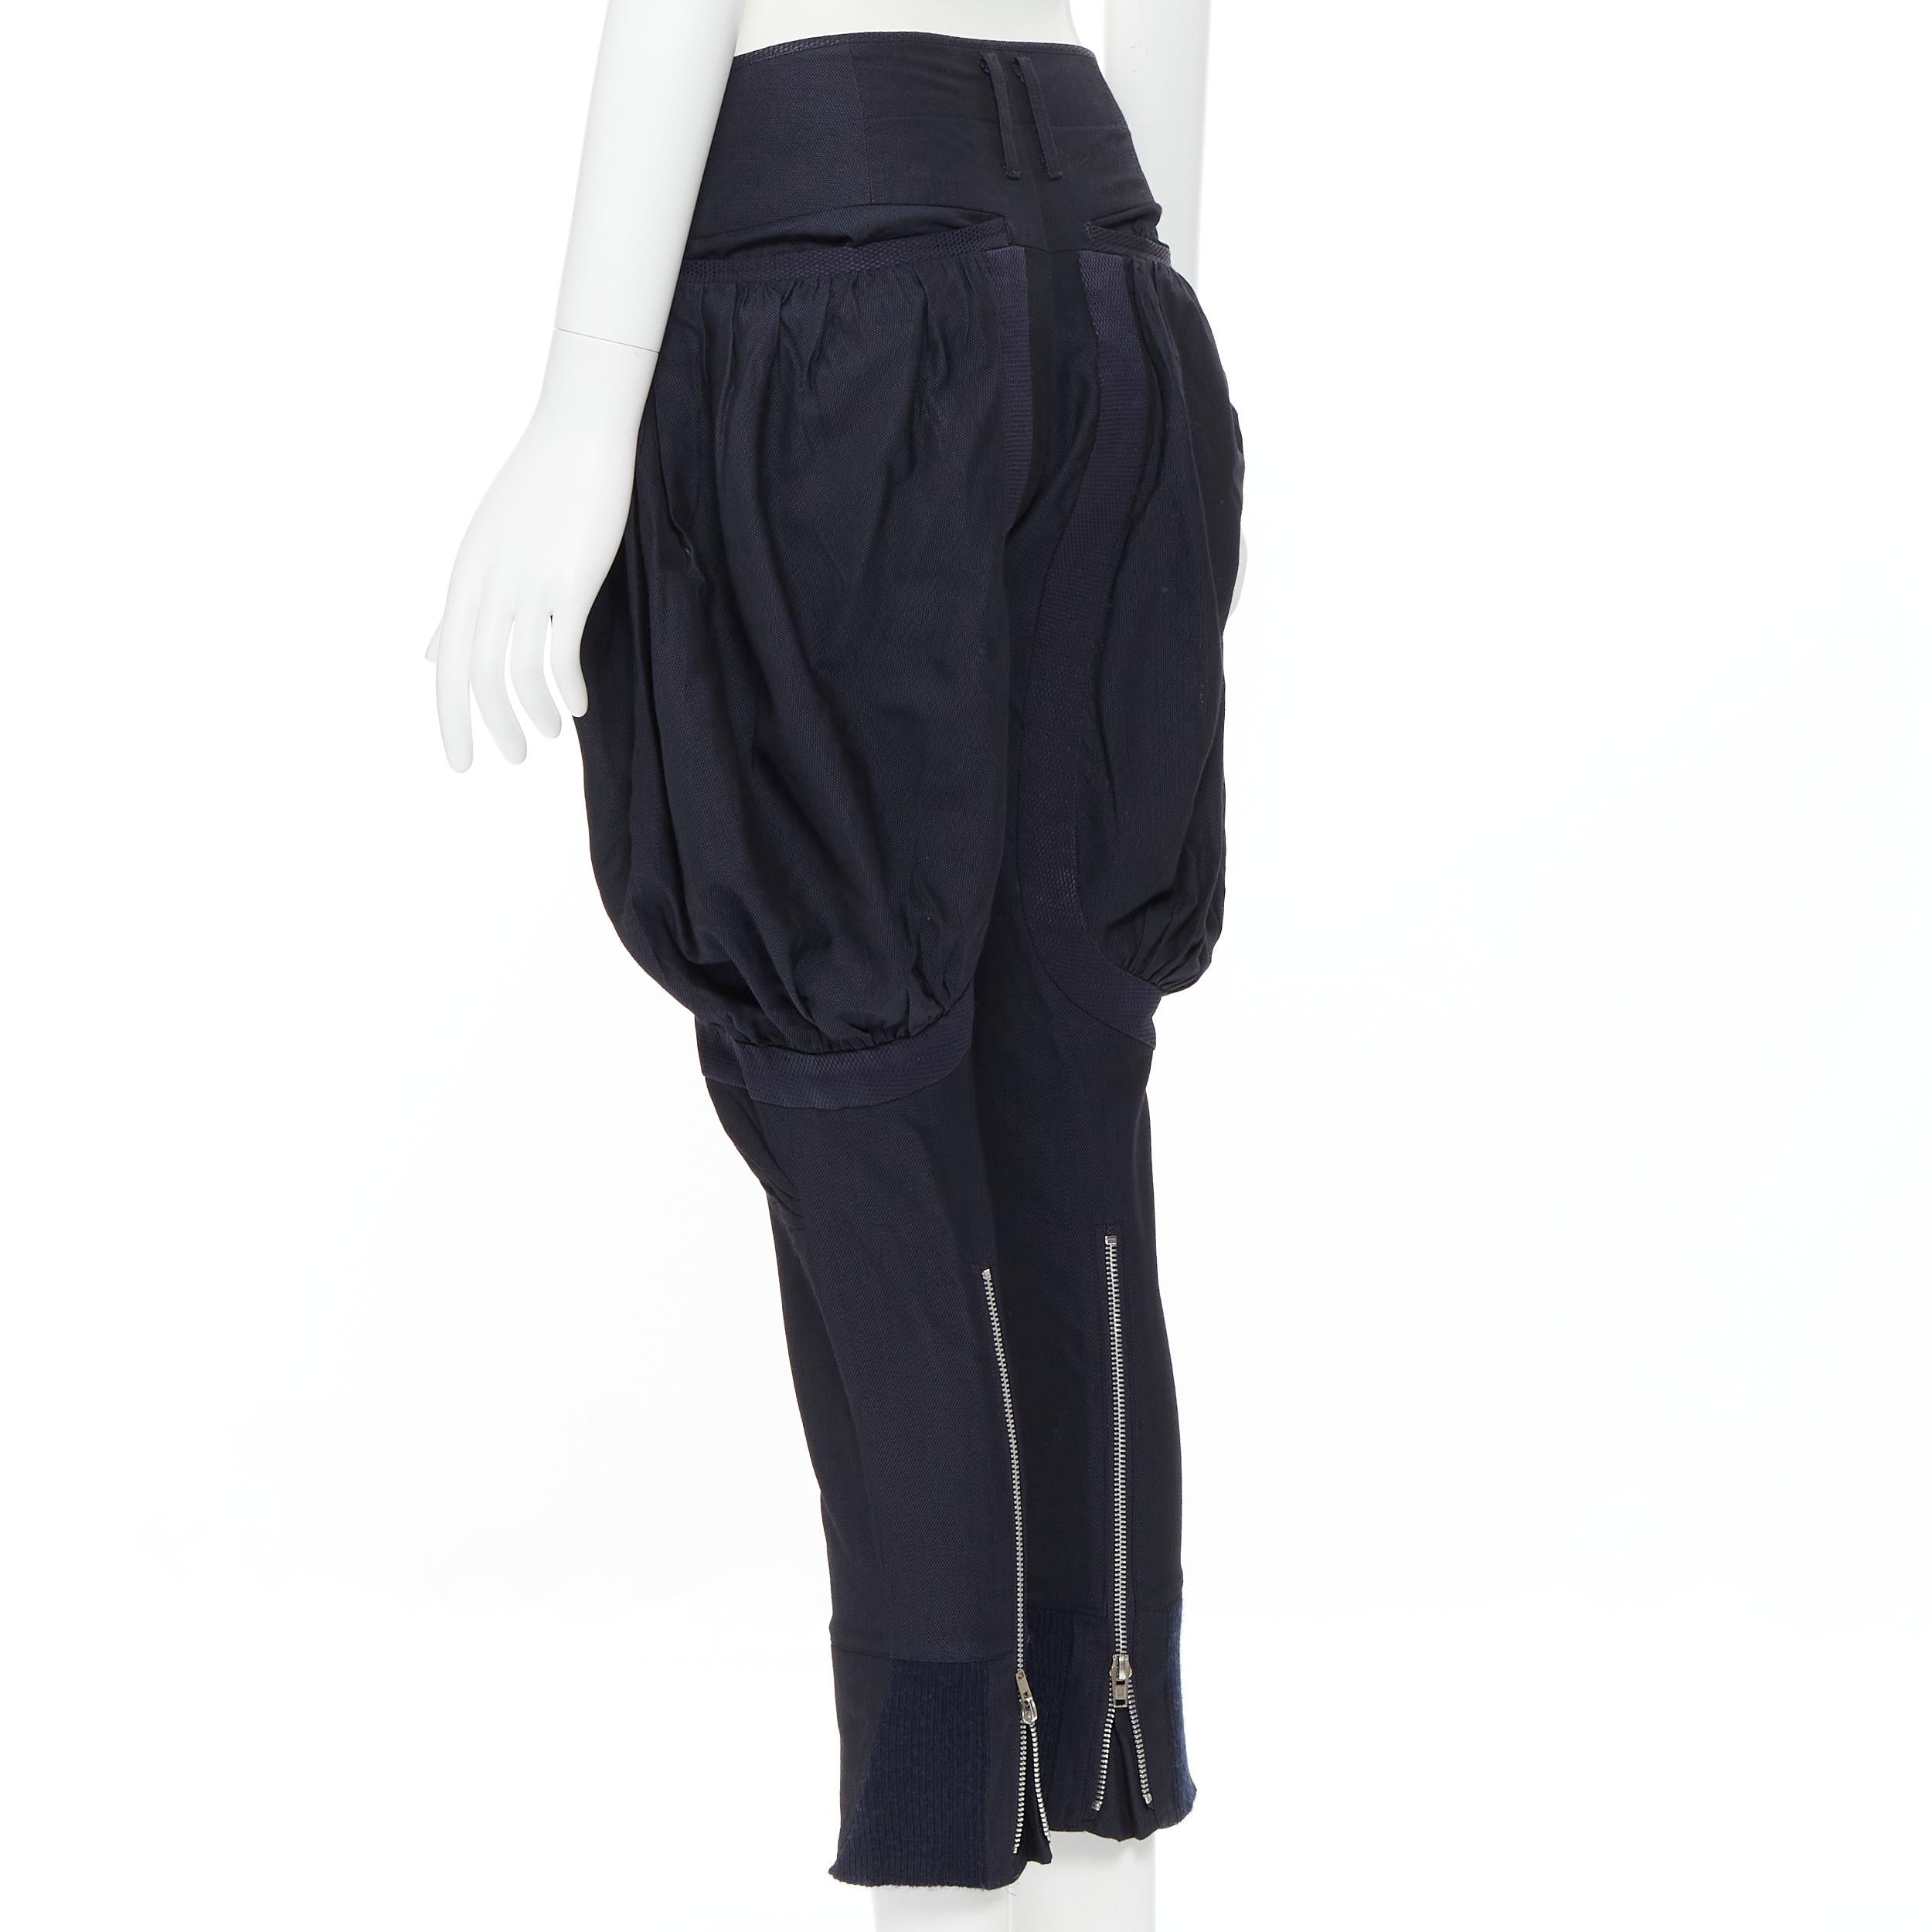 UNDERCOVER navy wool silk pleated exaggerated pockets jodphur riding pants M 1